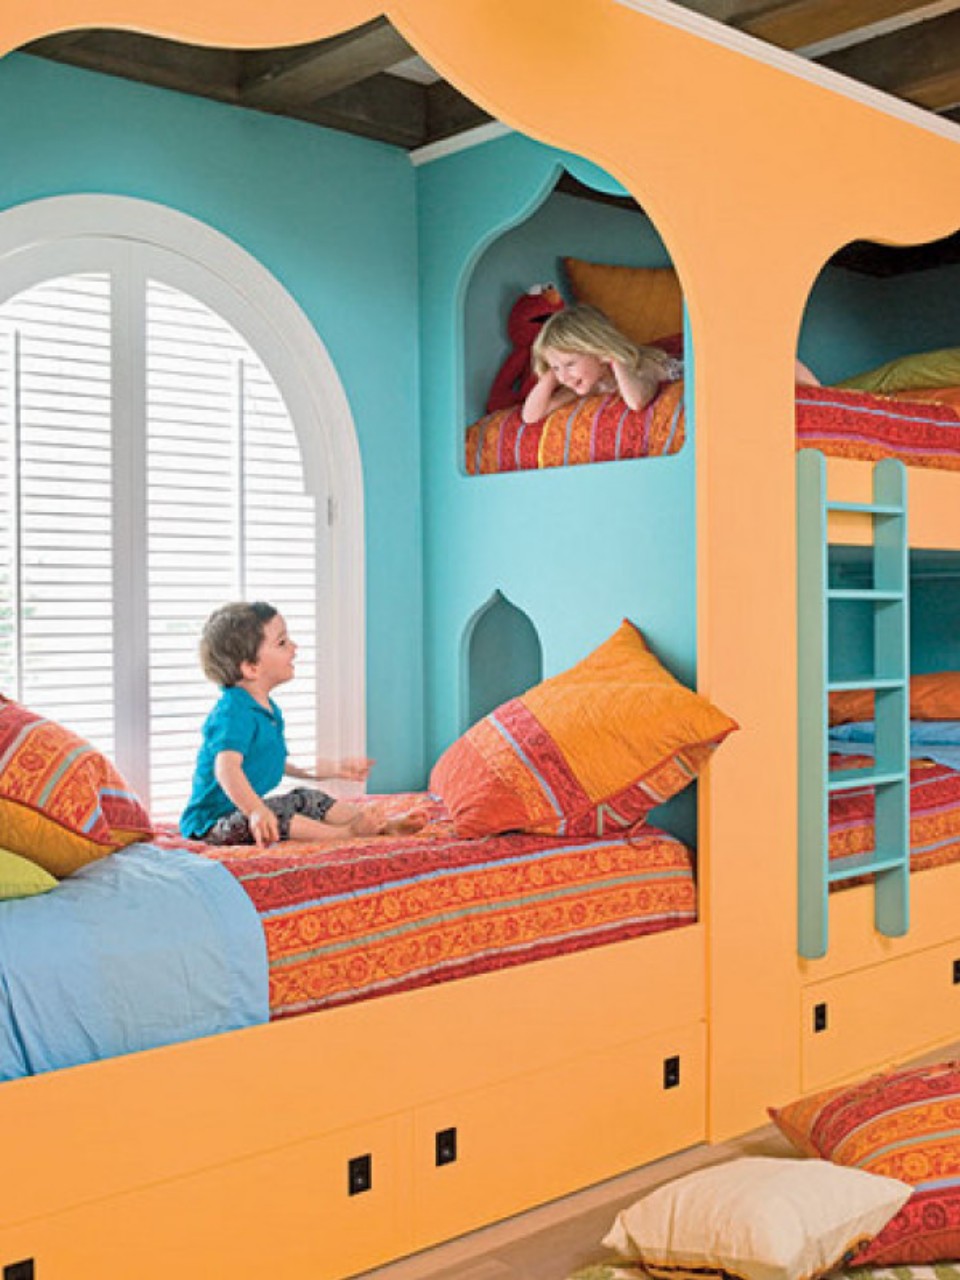 Kids Room Ideas Handsome Kids Room Furniture Design Ideas With Cute Orange Blue Bunk Bed For 3 Persons And Interesting White Curved Frame Window Also Sweet Bedding Set Design And Storage Under The Bed Idea Furniture Composing The Special Type Of Kids Room Furniture